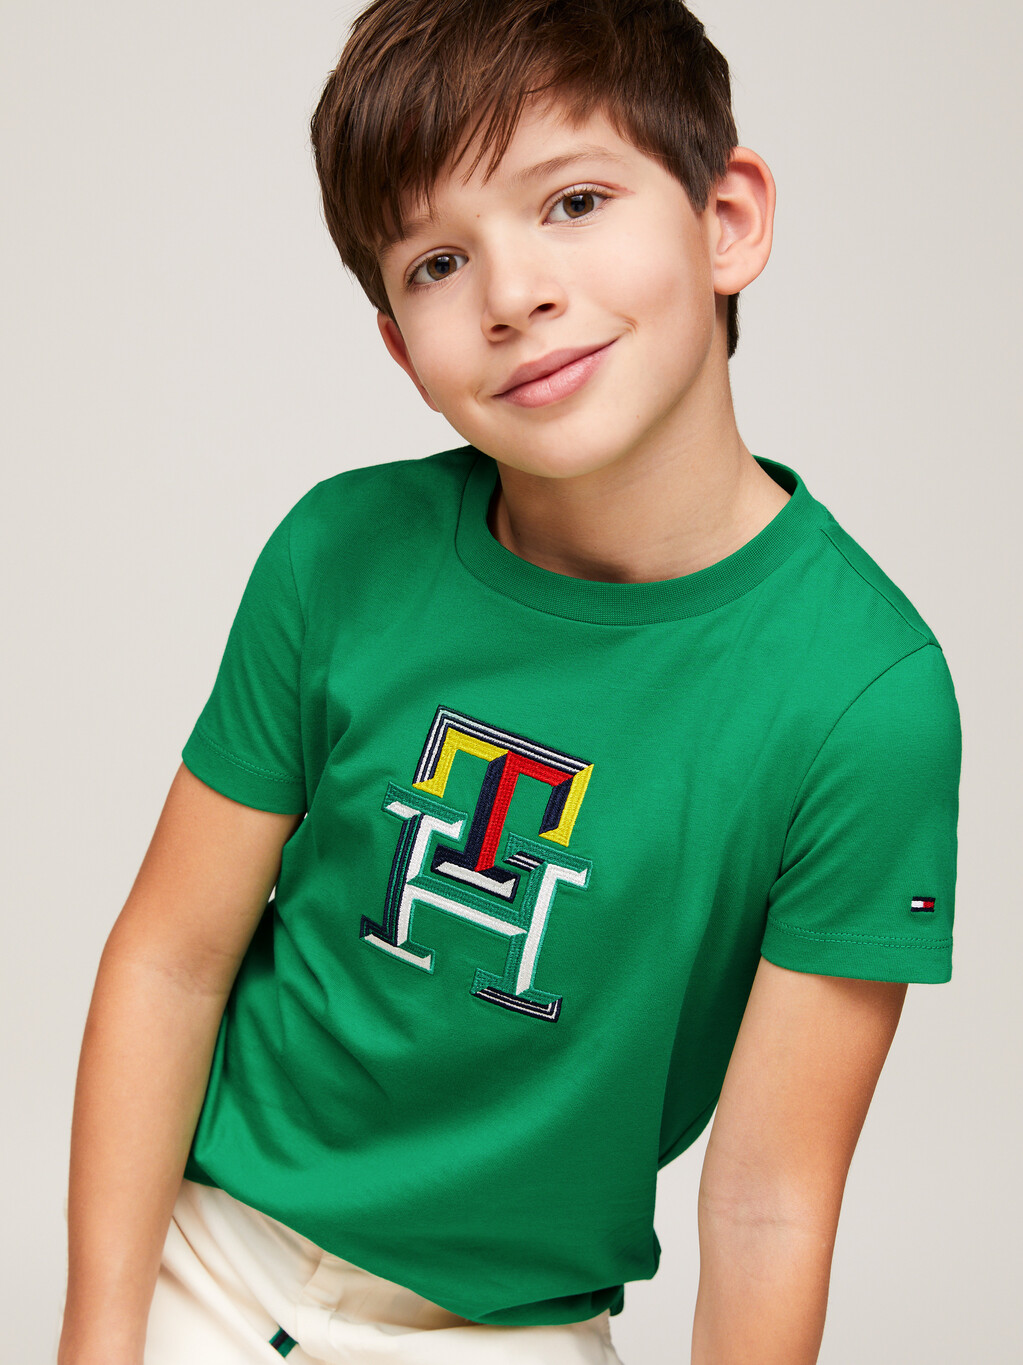 TH Monogram Multicolour Embroidery T-Shirt, Olympic Green, hi-res